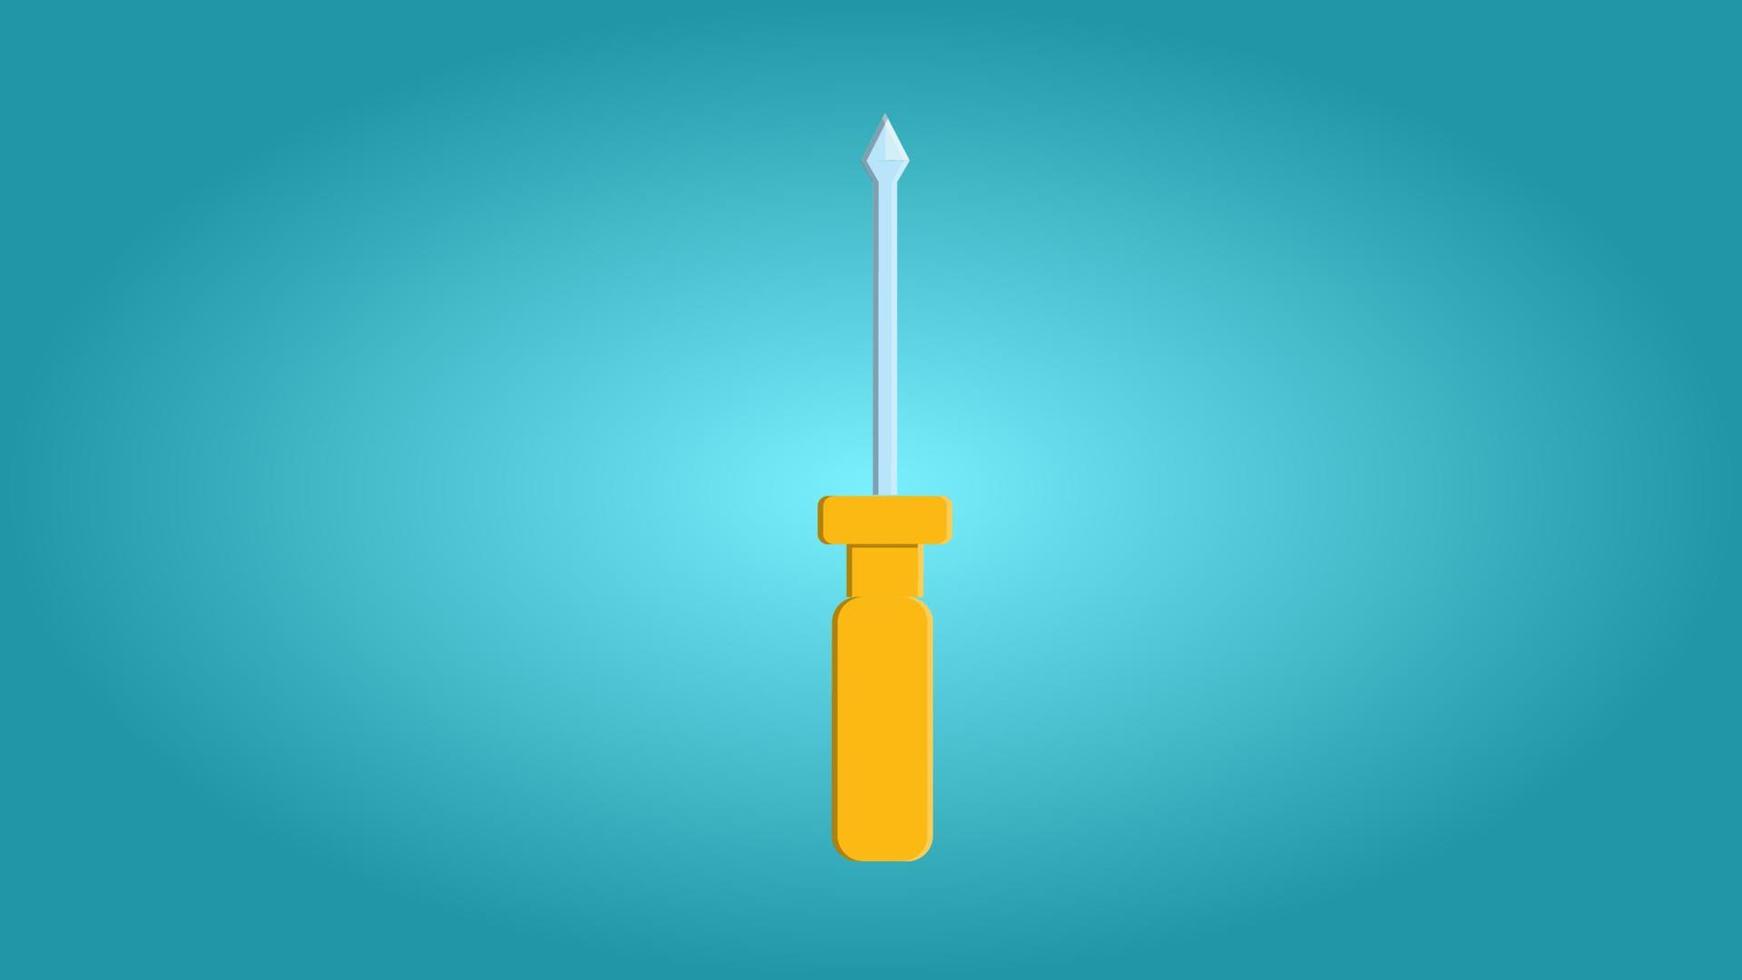 Tools for repair and construction manual yellow screwdriver for loosening screws on a blue background. Vector illustration